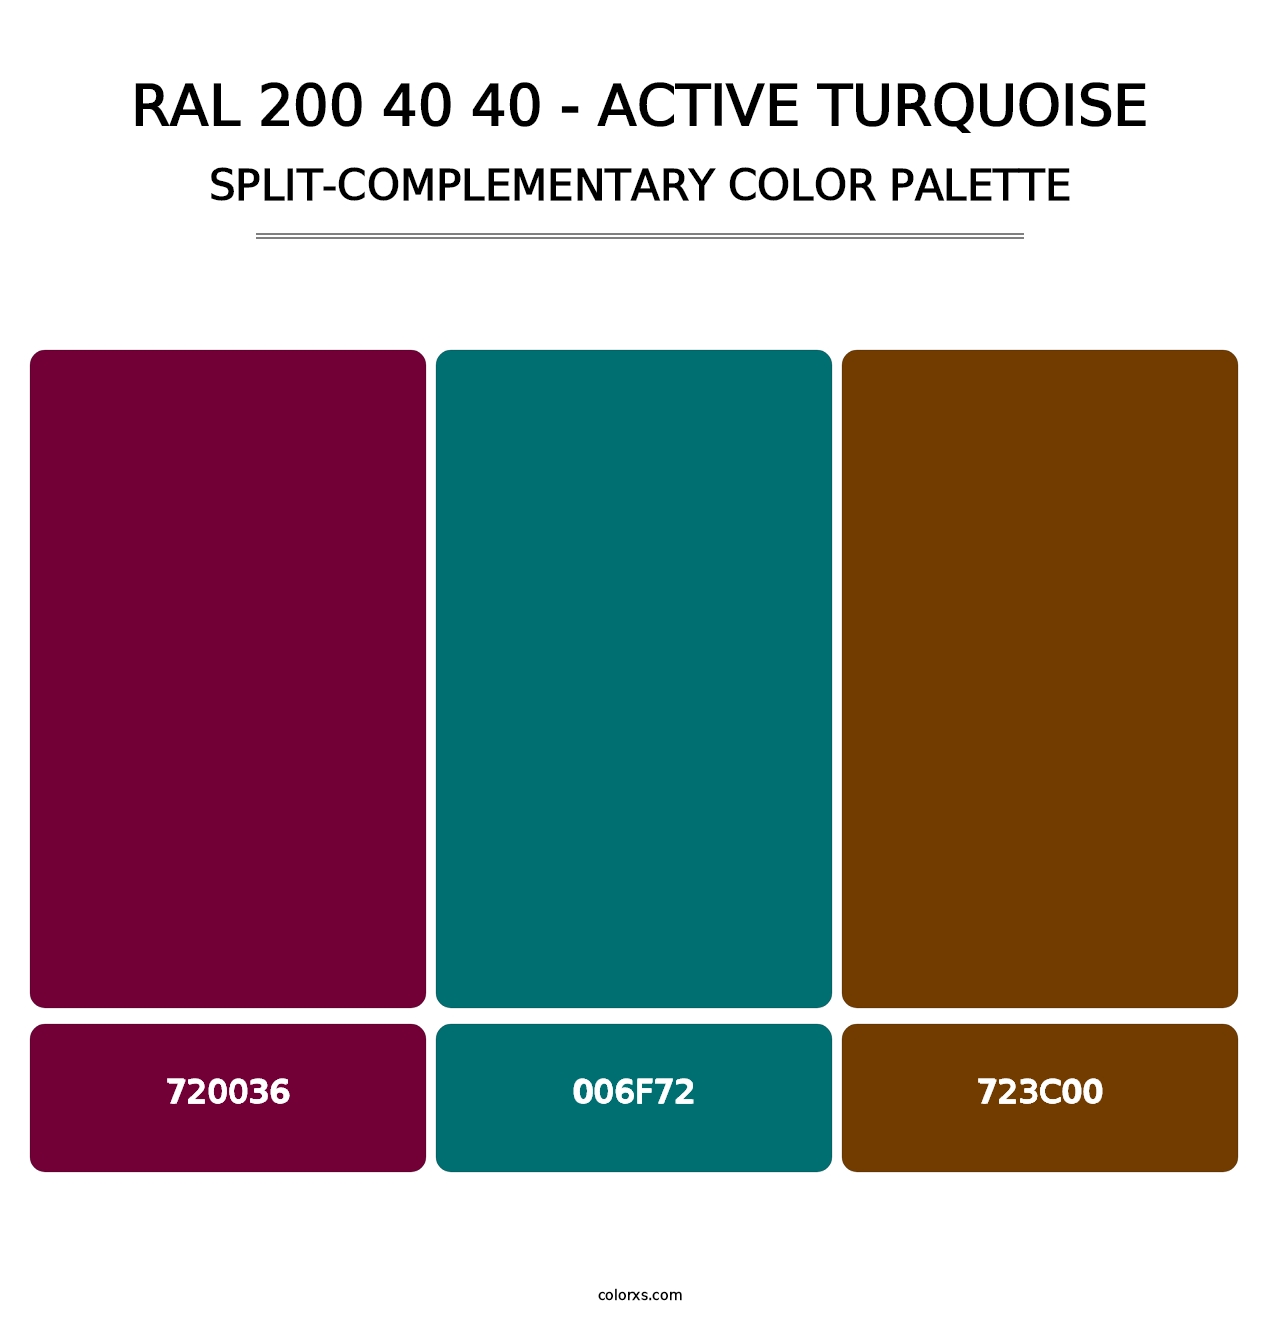 RAL 200 40 40 - Active Turquoise - Split-Complementary Color Palette